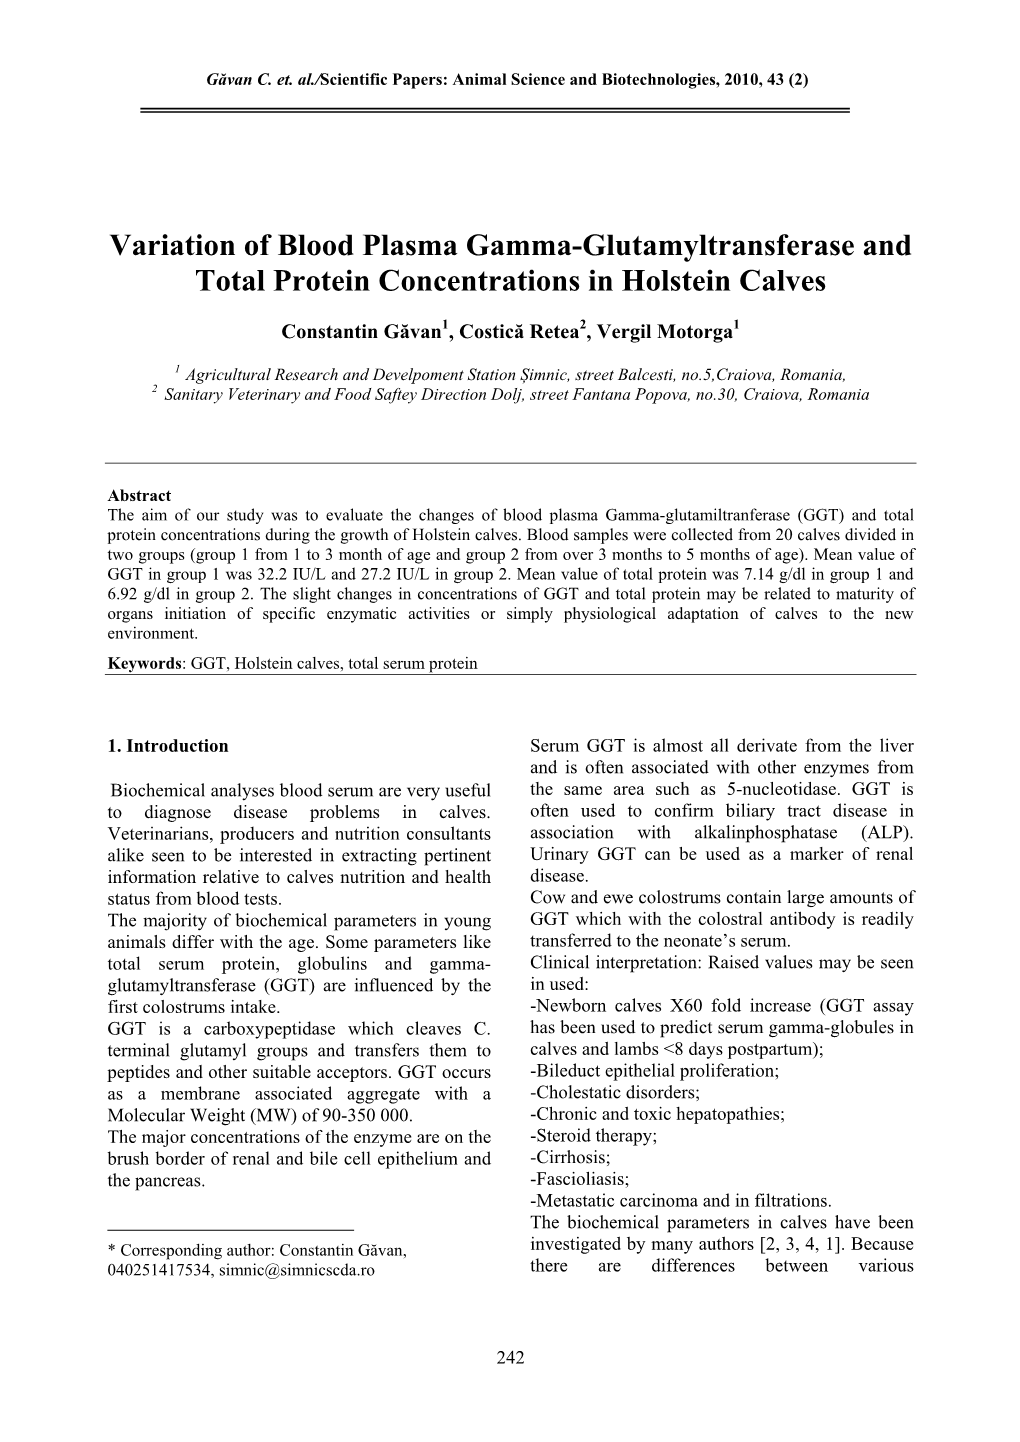 Variation of Blood Plasma Gamma-Glutamyltransferase and Total Protein Concentrations in Holstein Calves